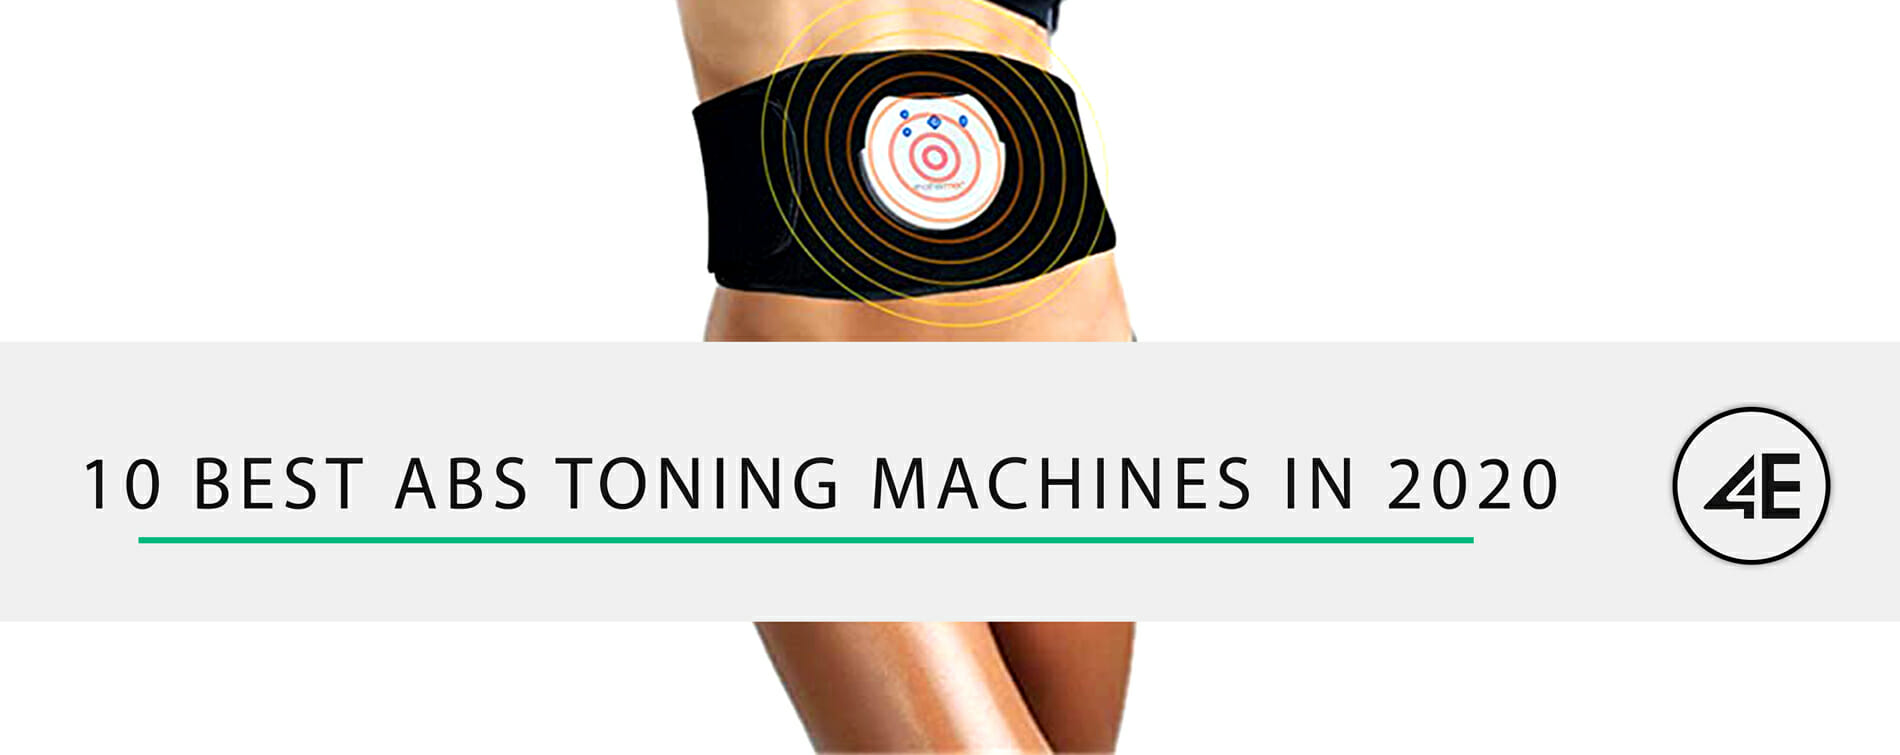 10 Best Abs Toning Machines in 2020